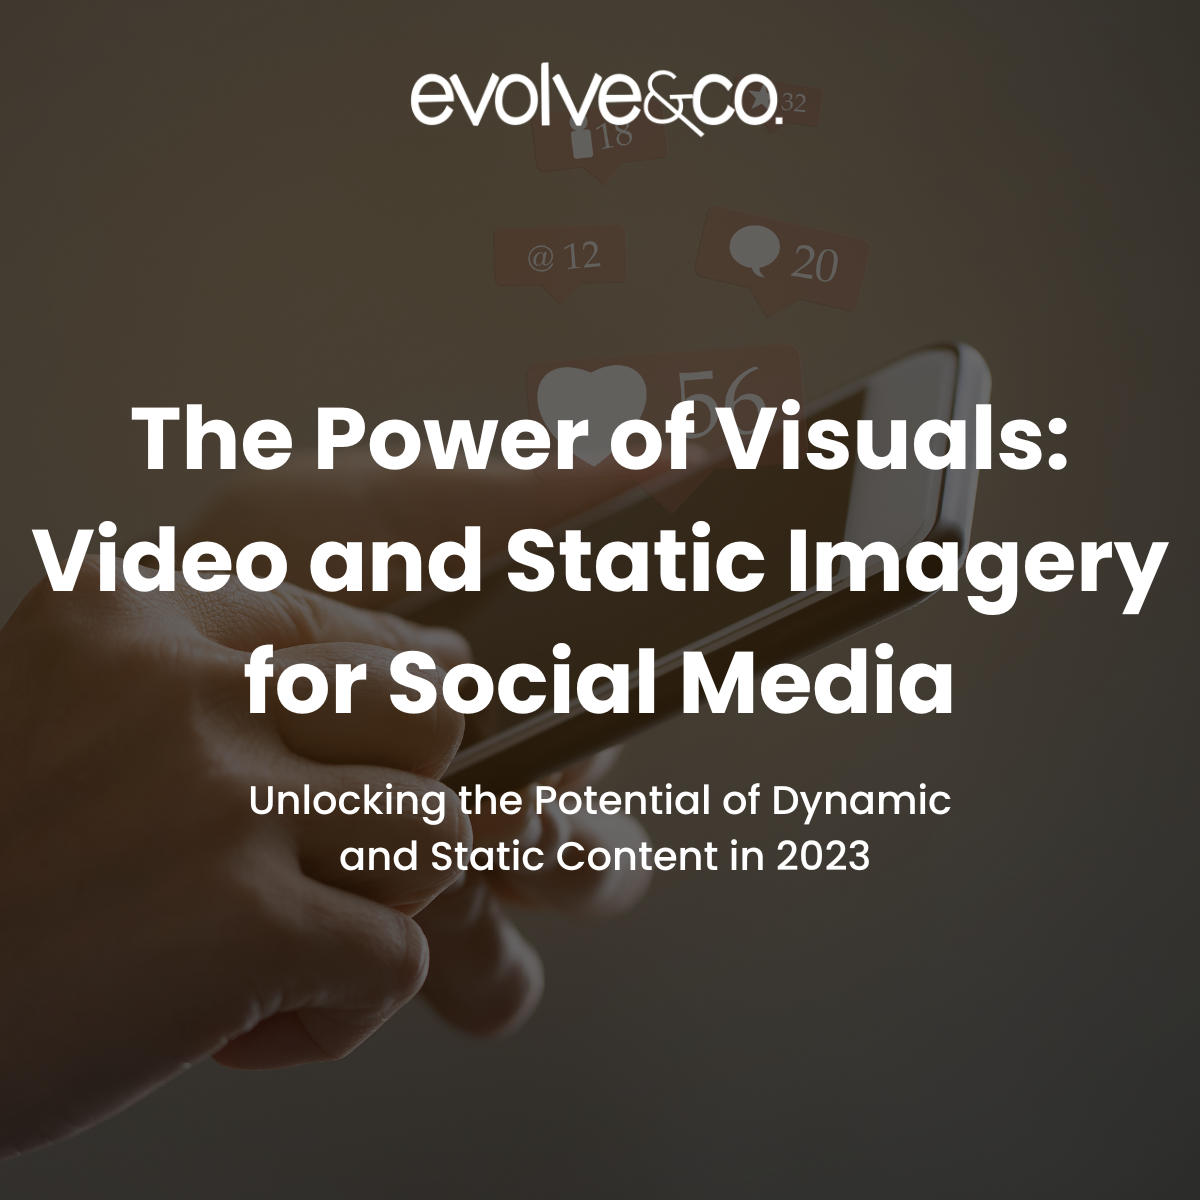 The Power of Visuals: Video and Static Imagery for Social Media